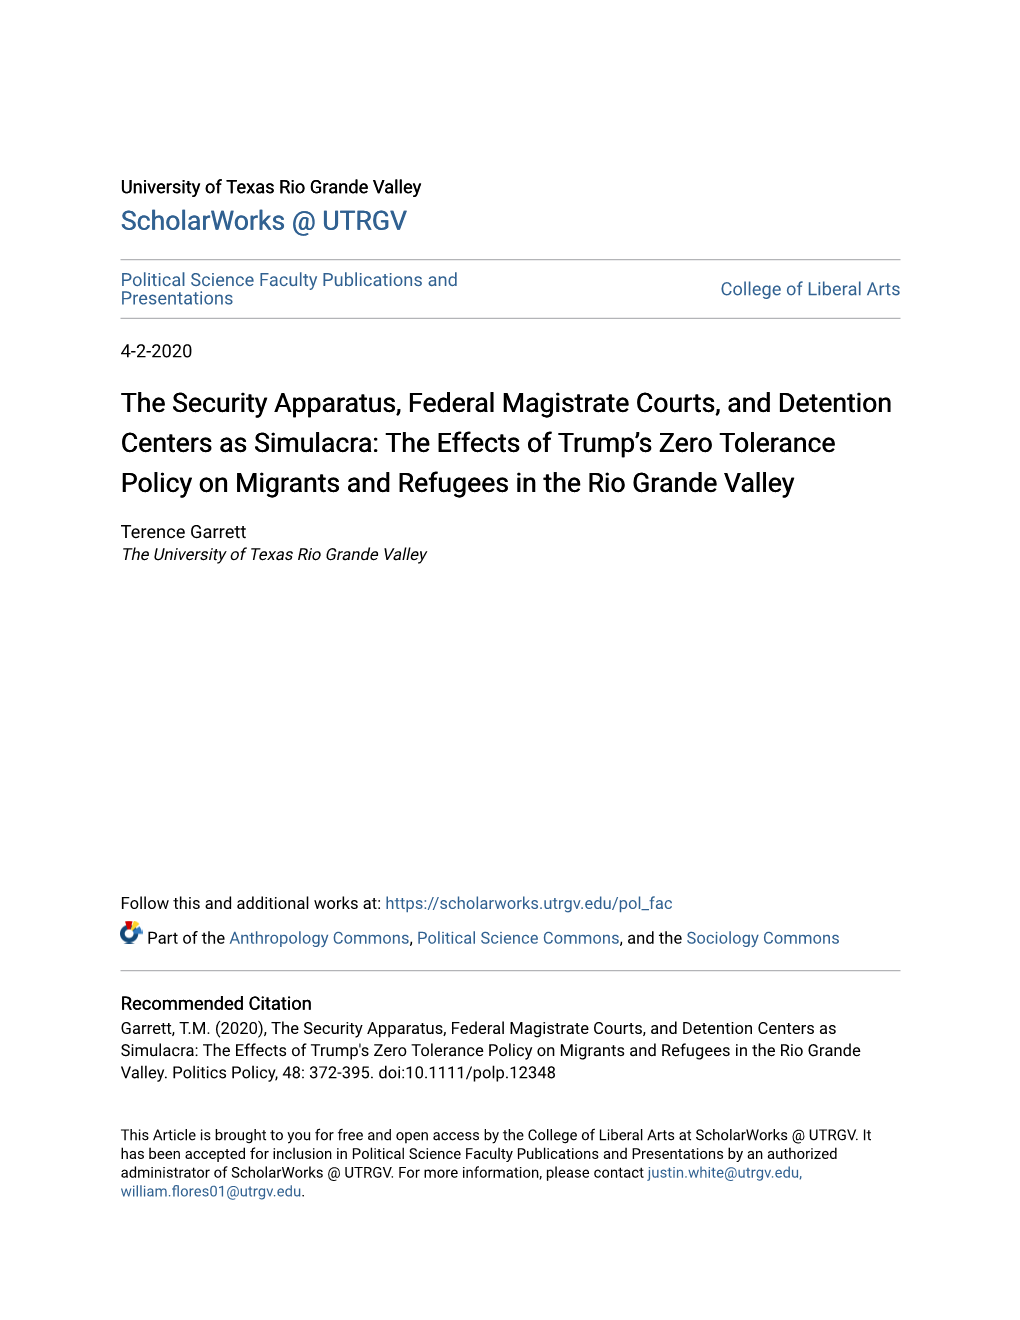 The Security Apparatus, Federal Magistrate Courts, and Detention